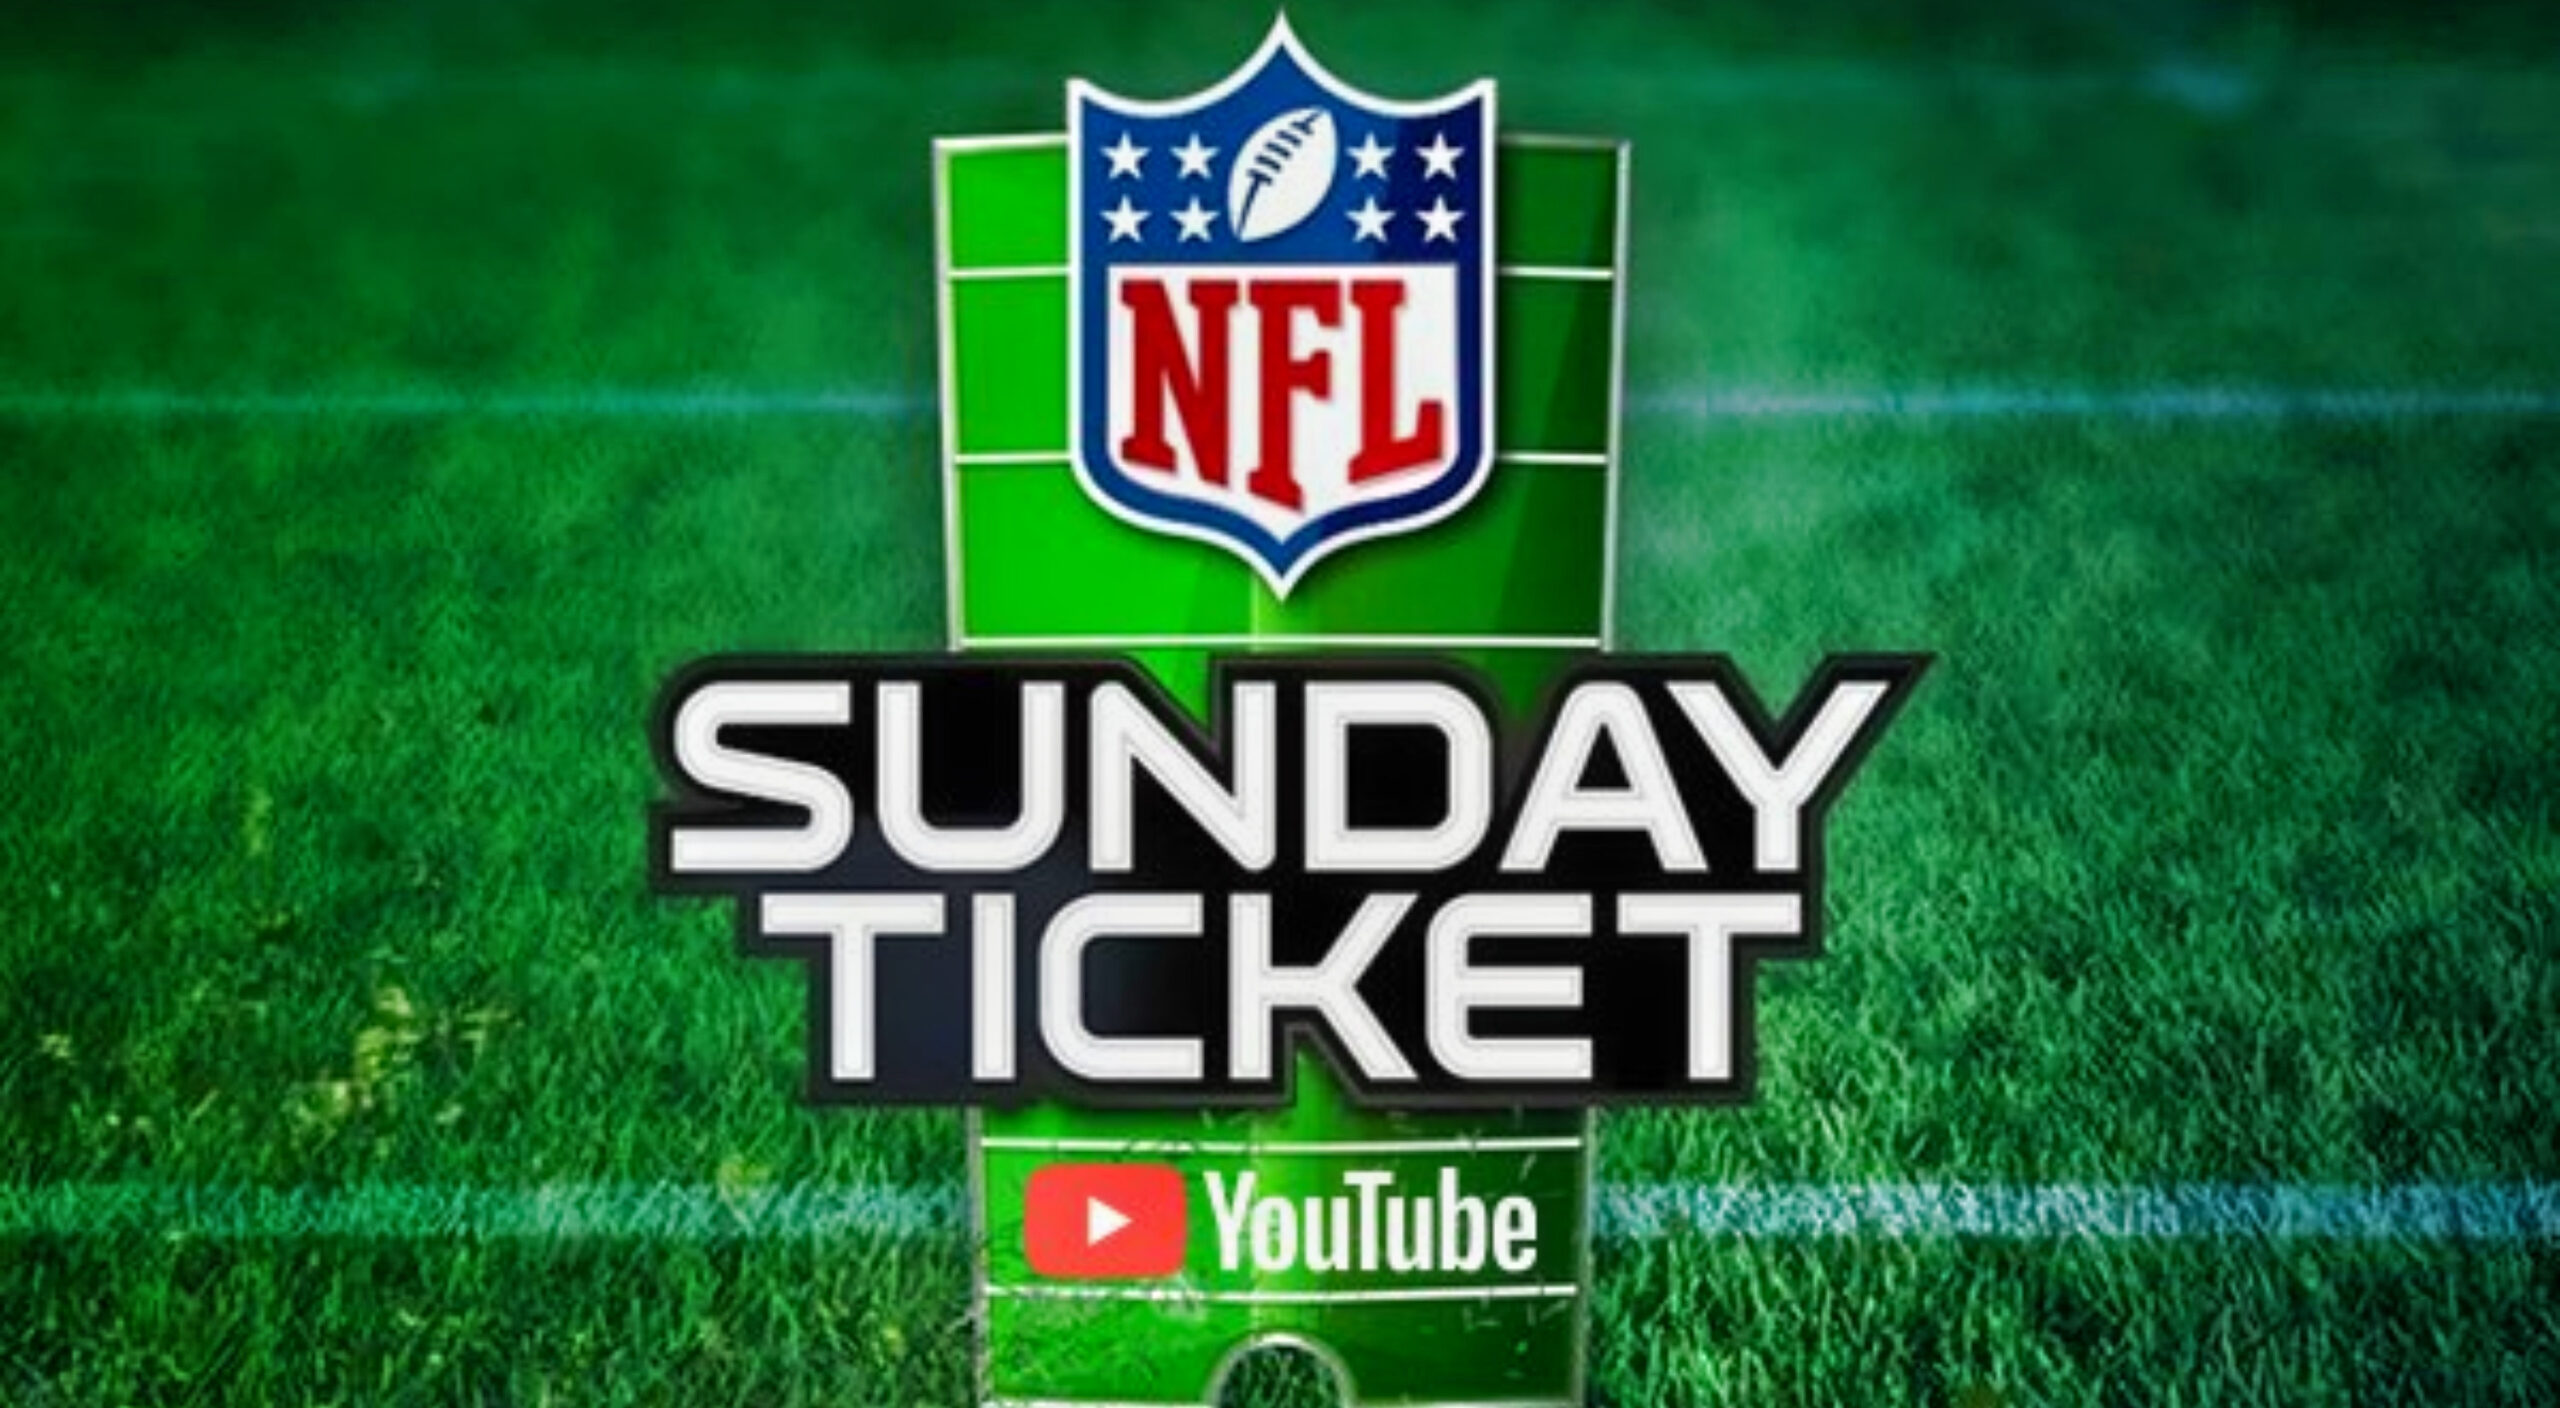 Does NFL Sunday Ticket Have a Student Discount? All You Need To Know